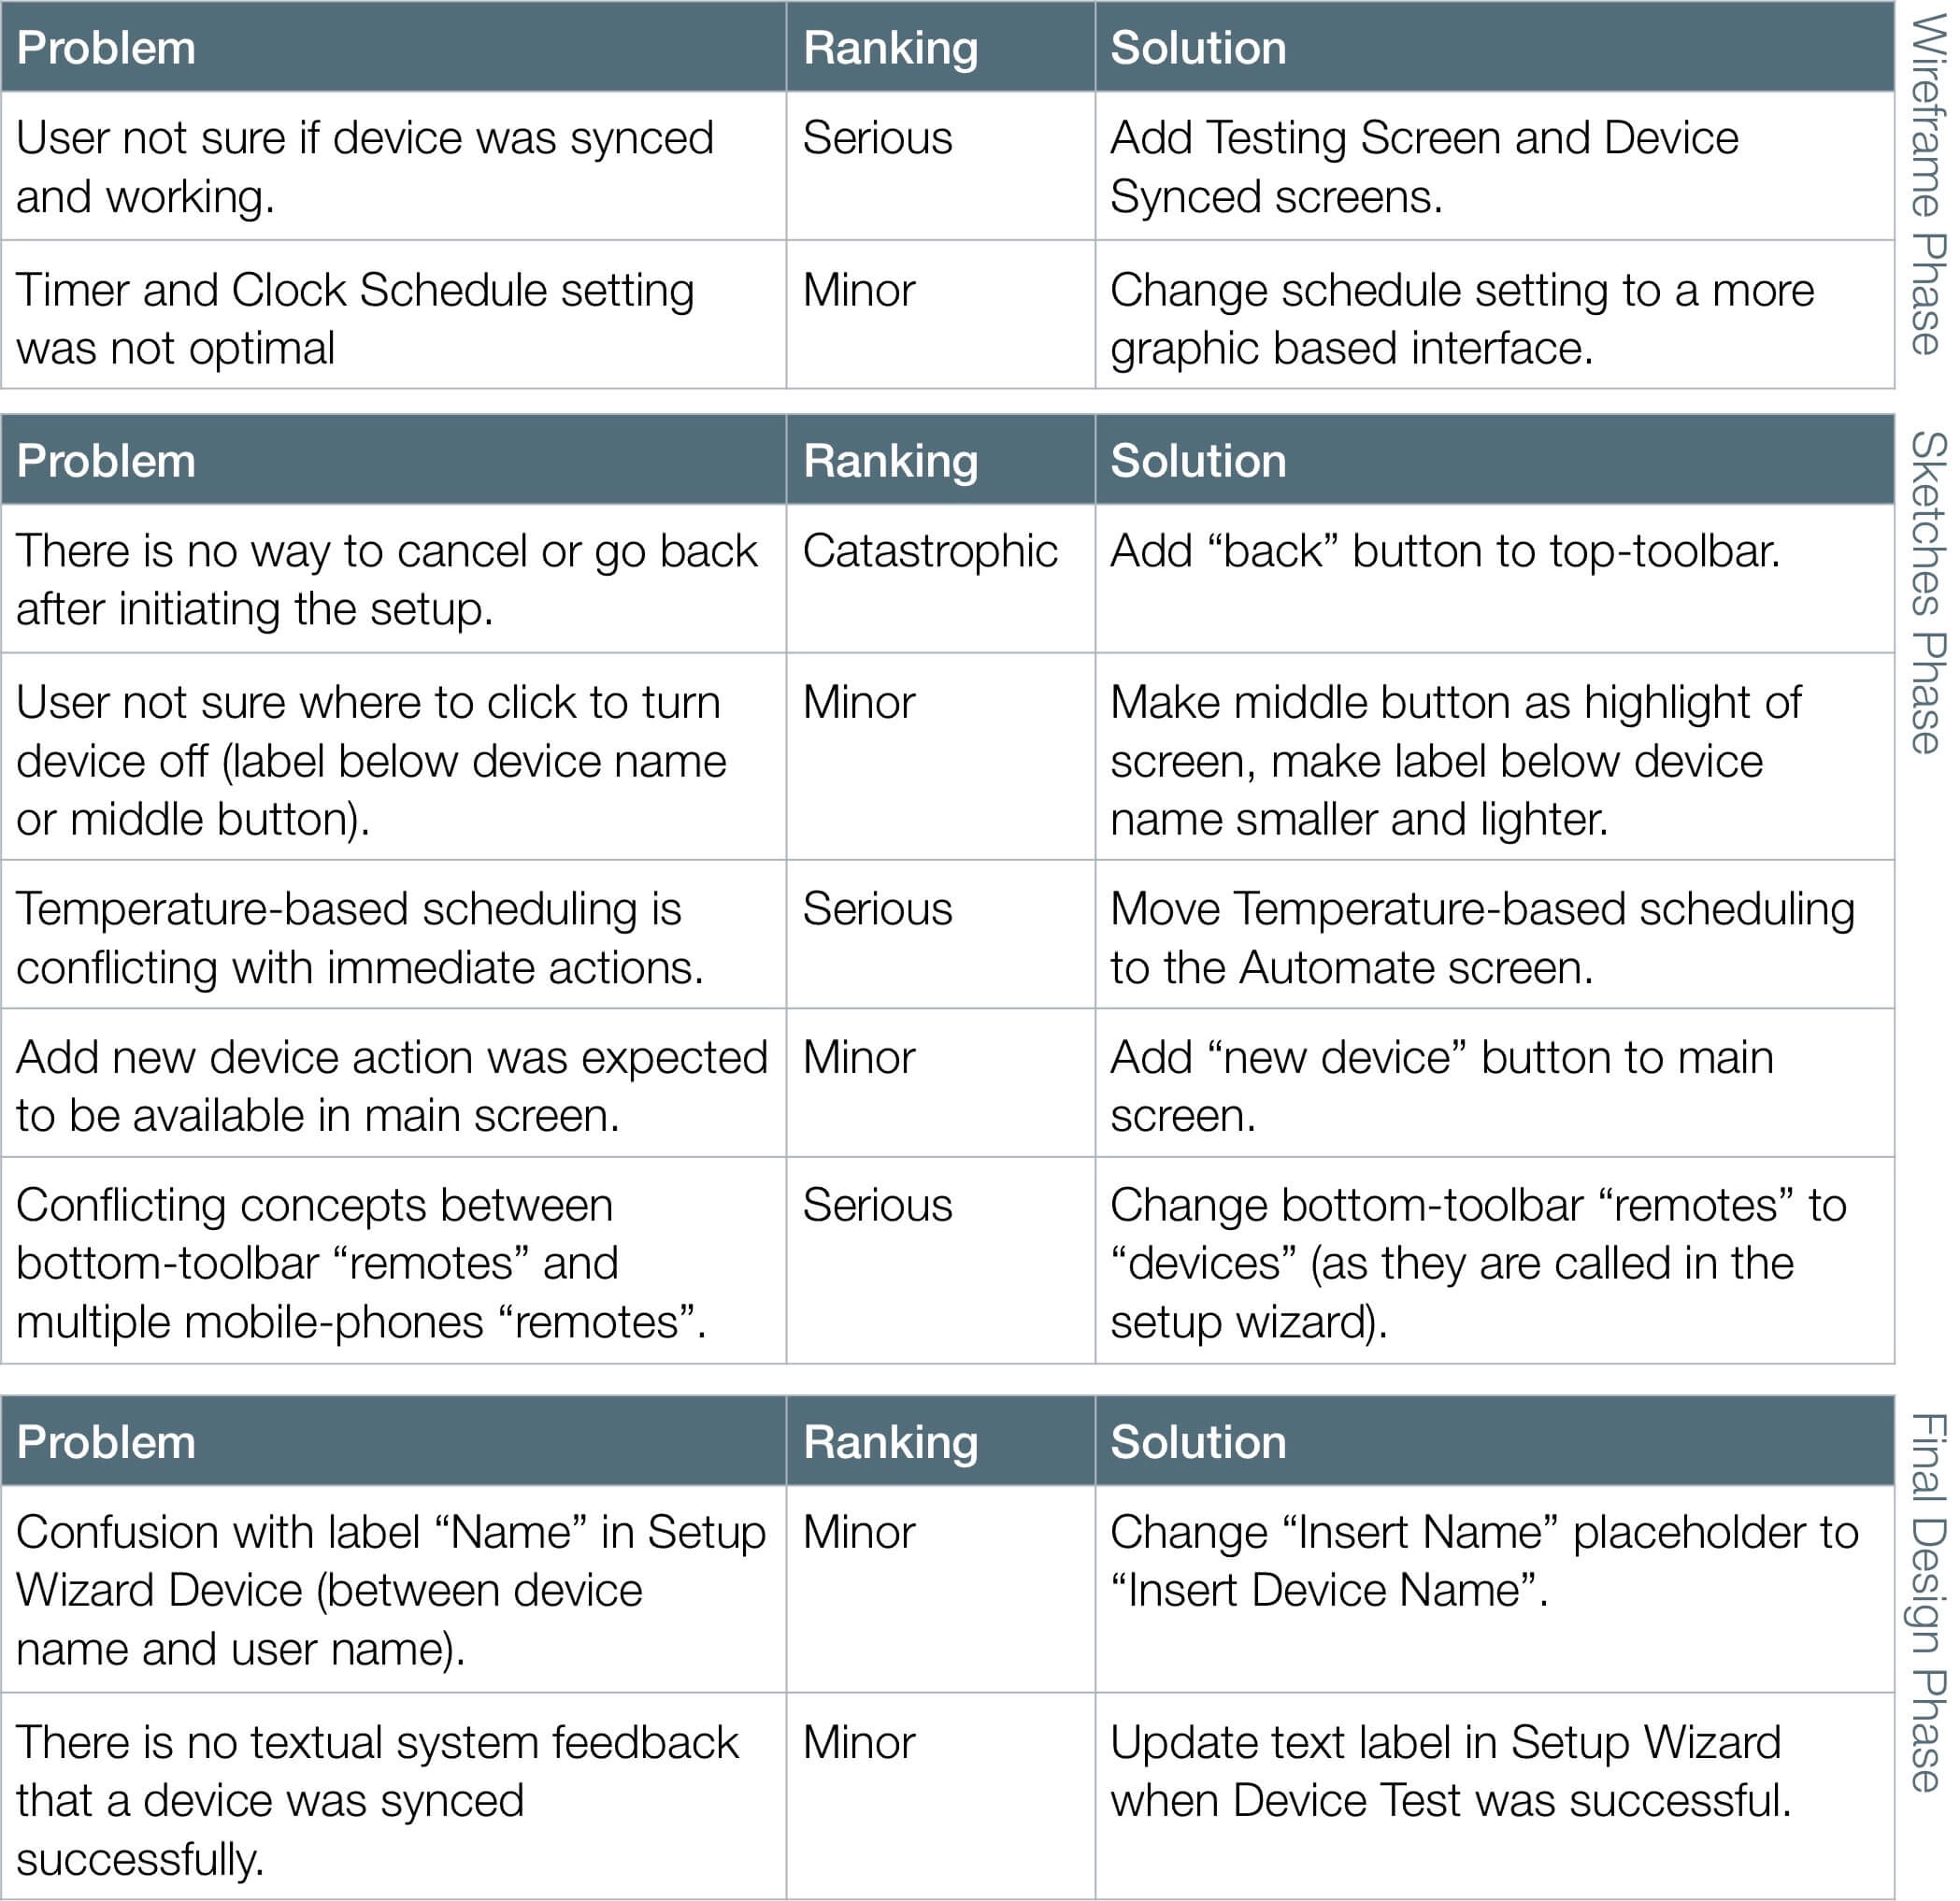 Issues found during the usability sessions ranked on three-point scale